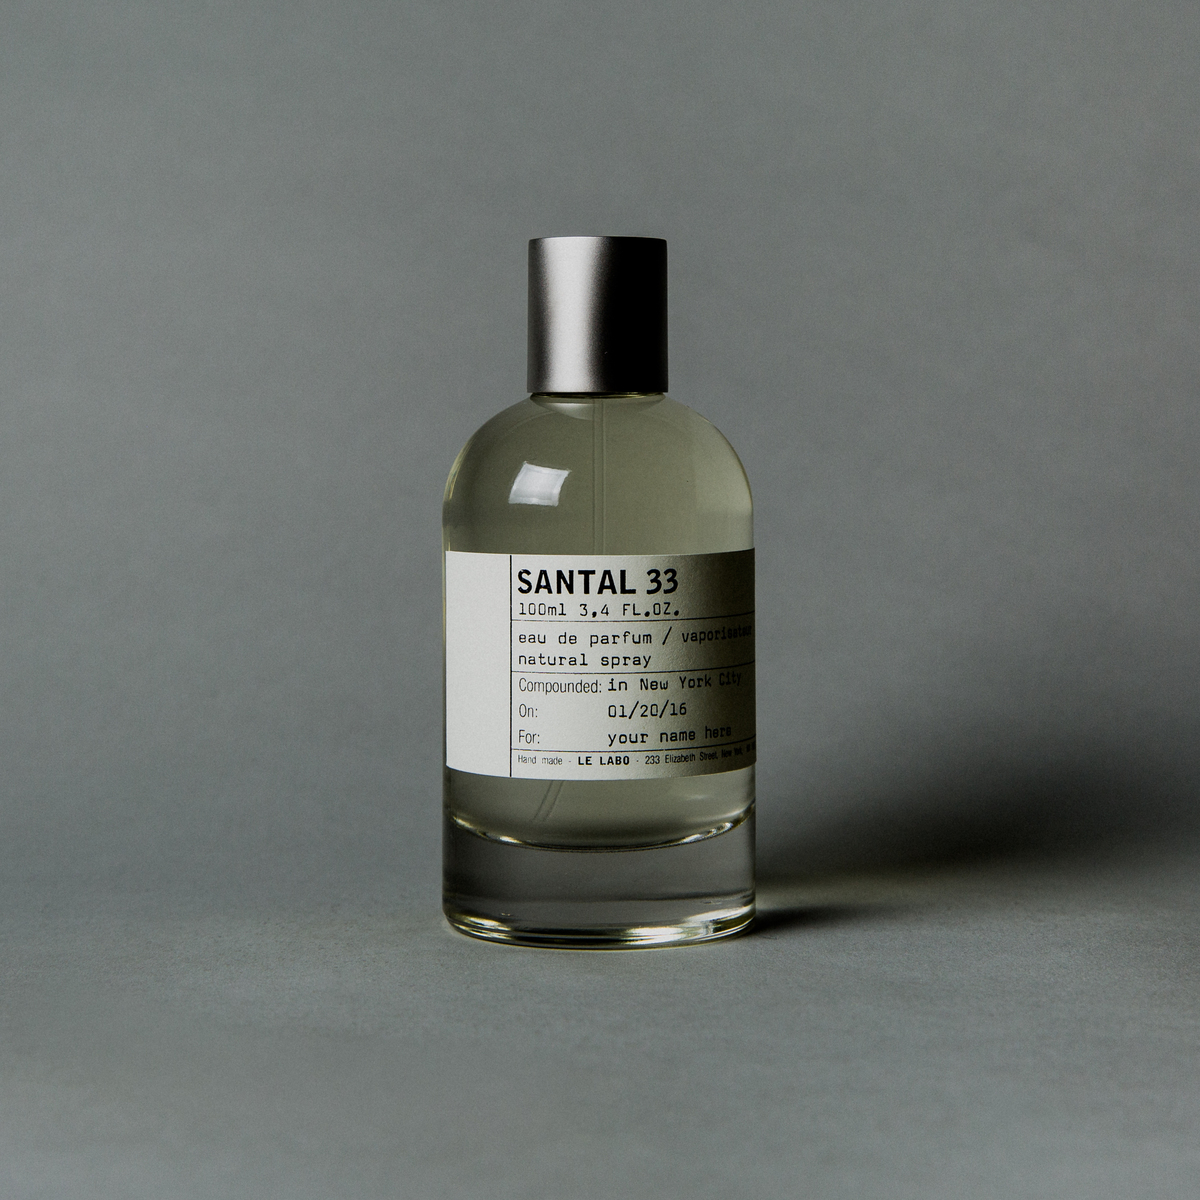 Cult perfumery Le Labo is opening in Aus